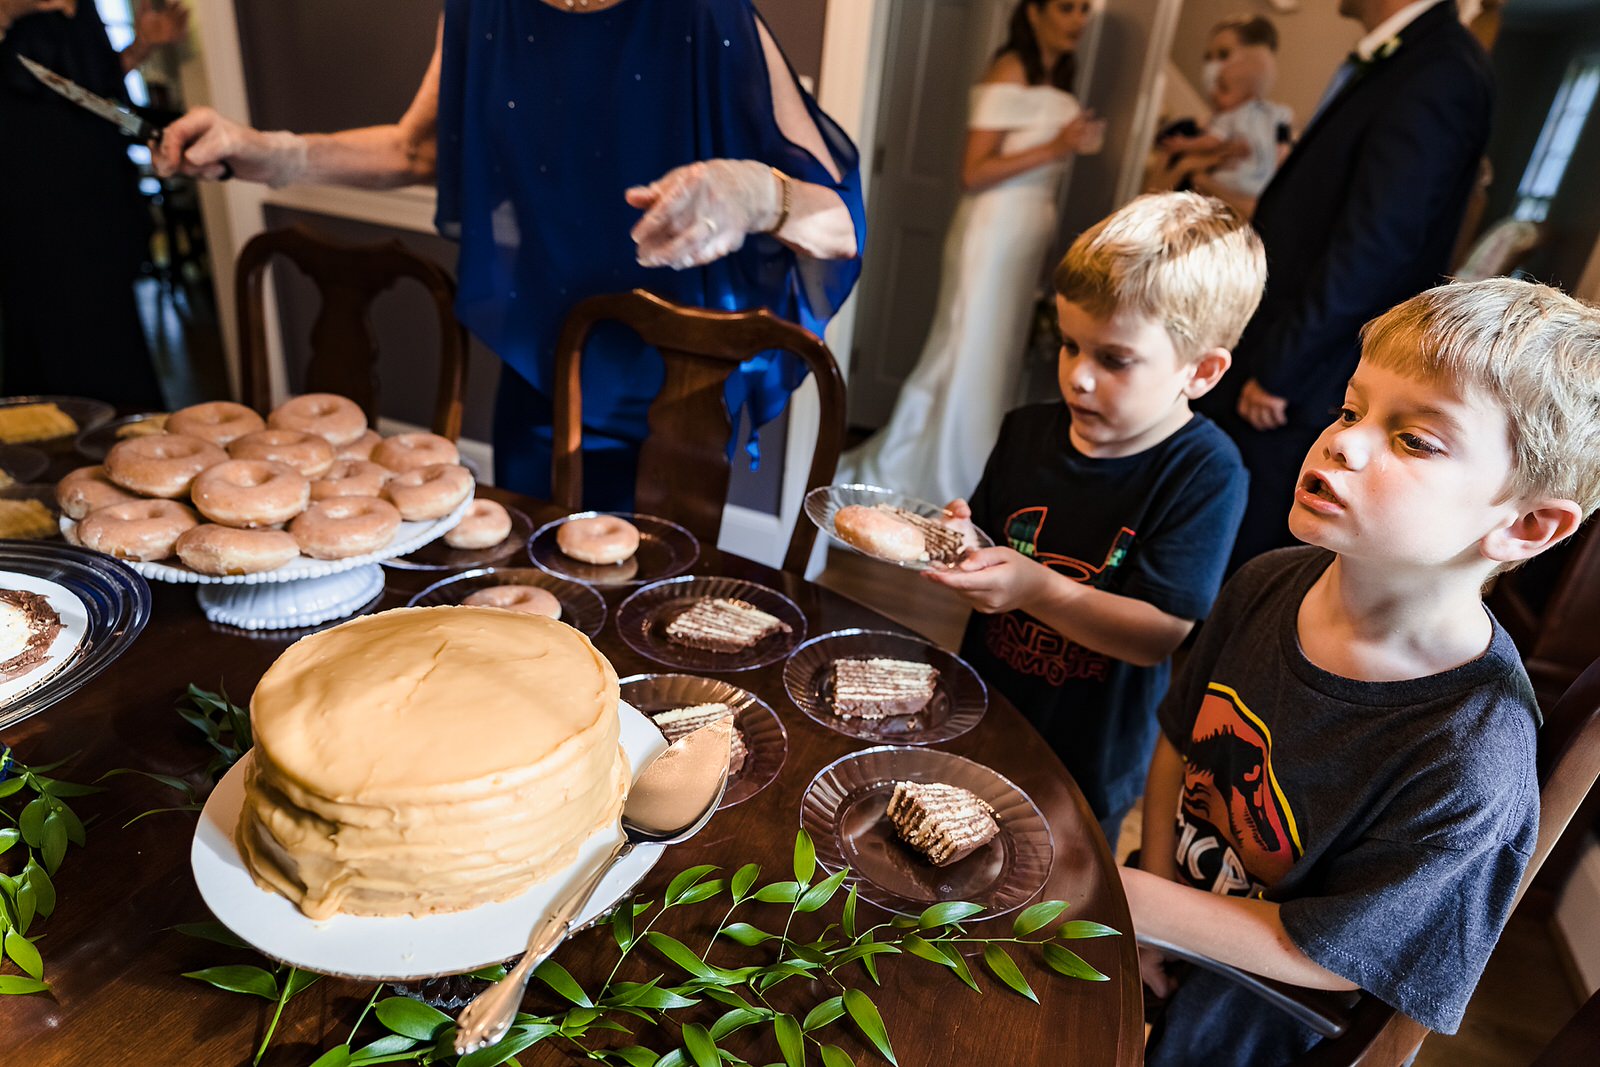 Groom's sons look at wedding cake and donuts excitedly